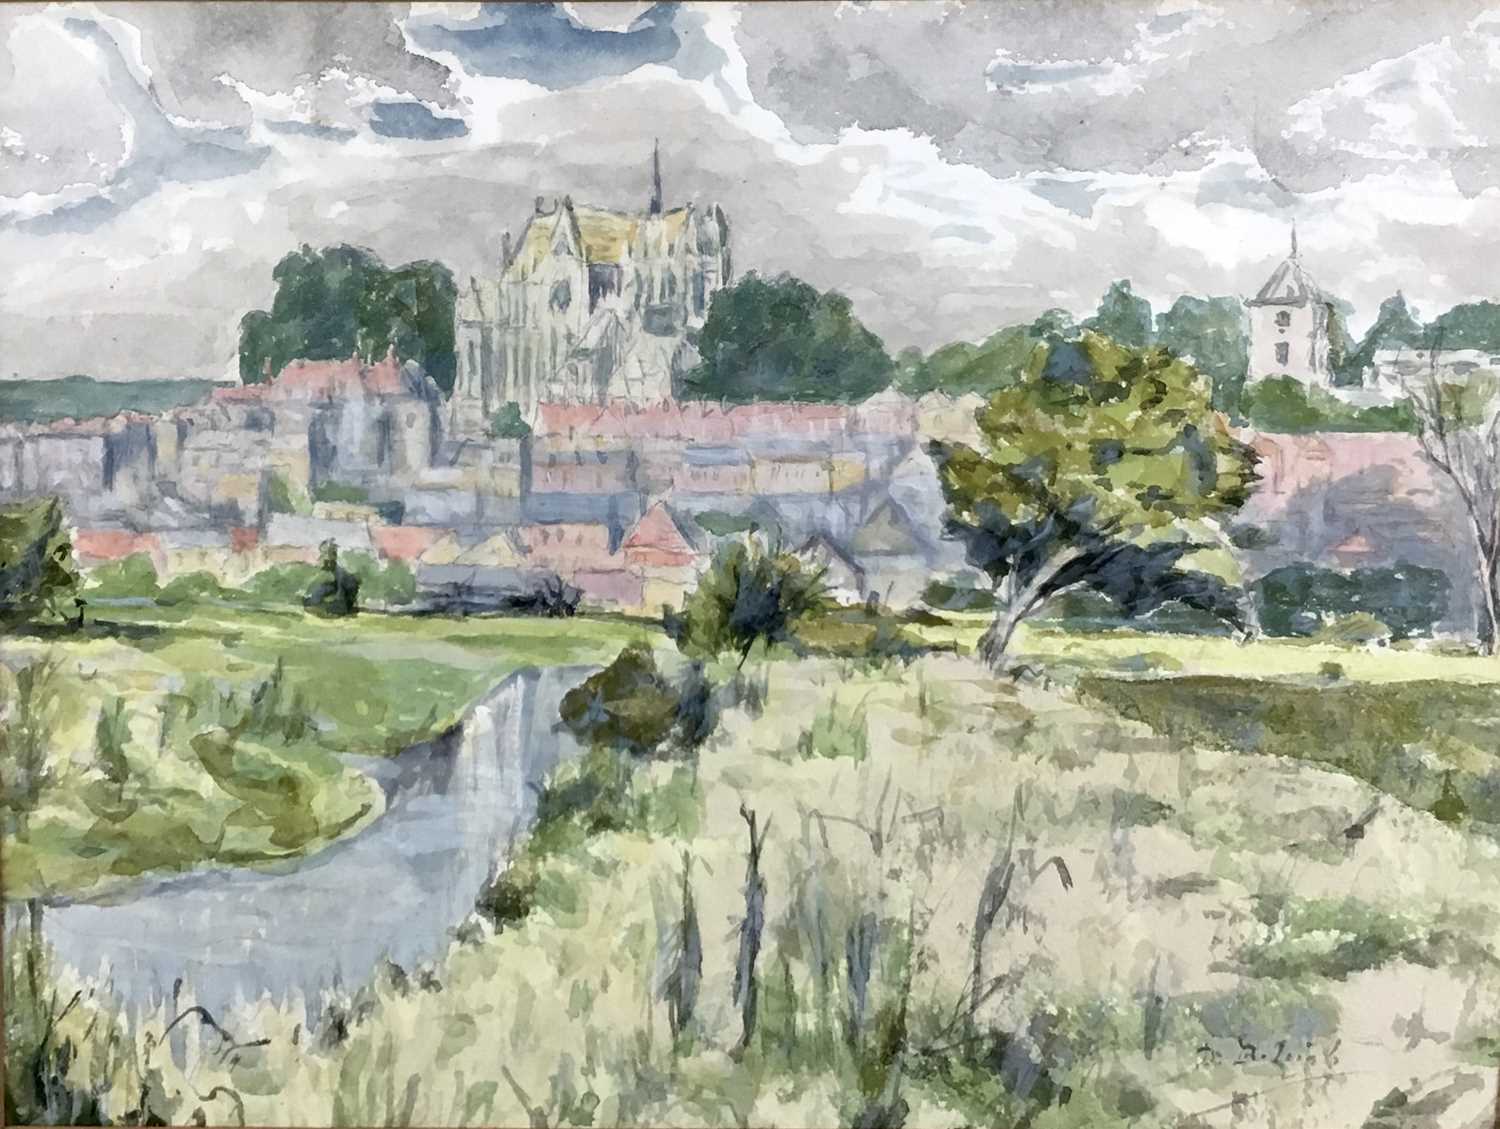 Lot 47 - Dora Boughton-Leigh (act. 1903-1940) watercolour and bodycolour - Arundel from the Meadows, signed, 25cm x 33cm, in glazed gilt frame, labels verso 
Exhibited: Royal Academy Exhibition 1942